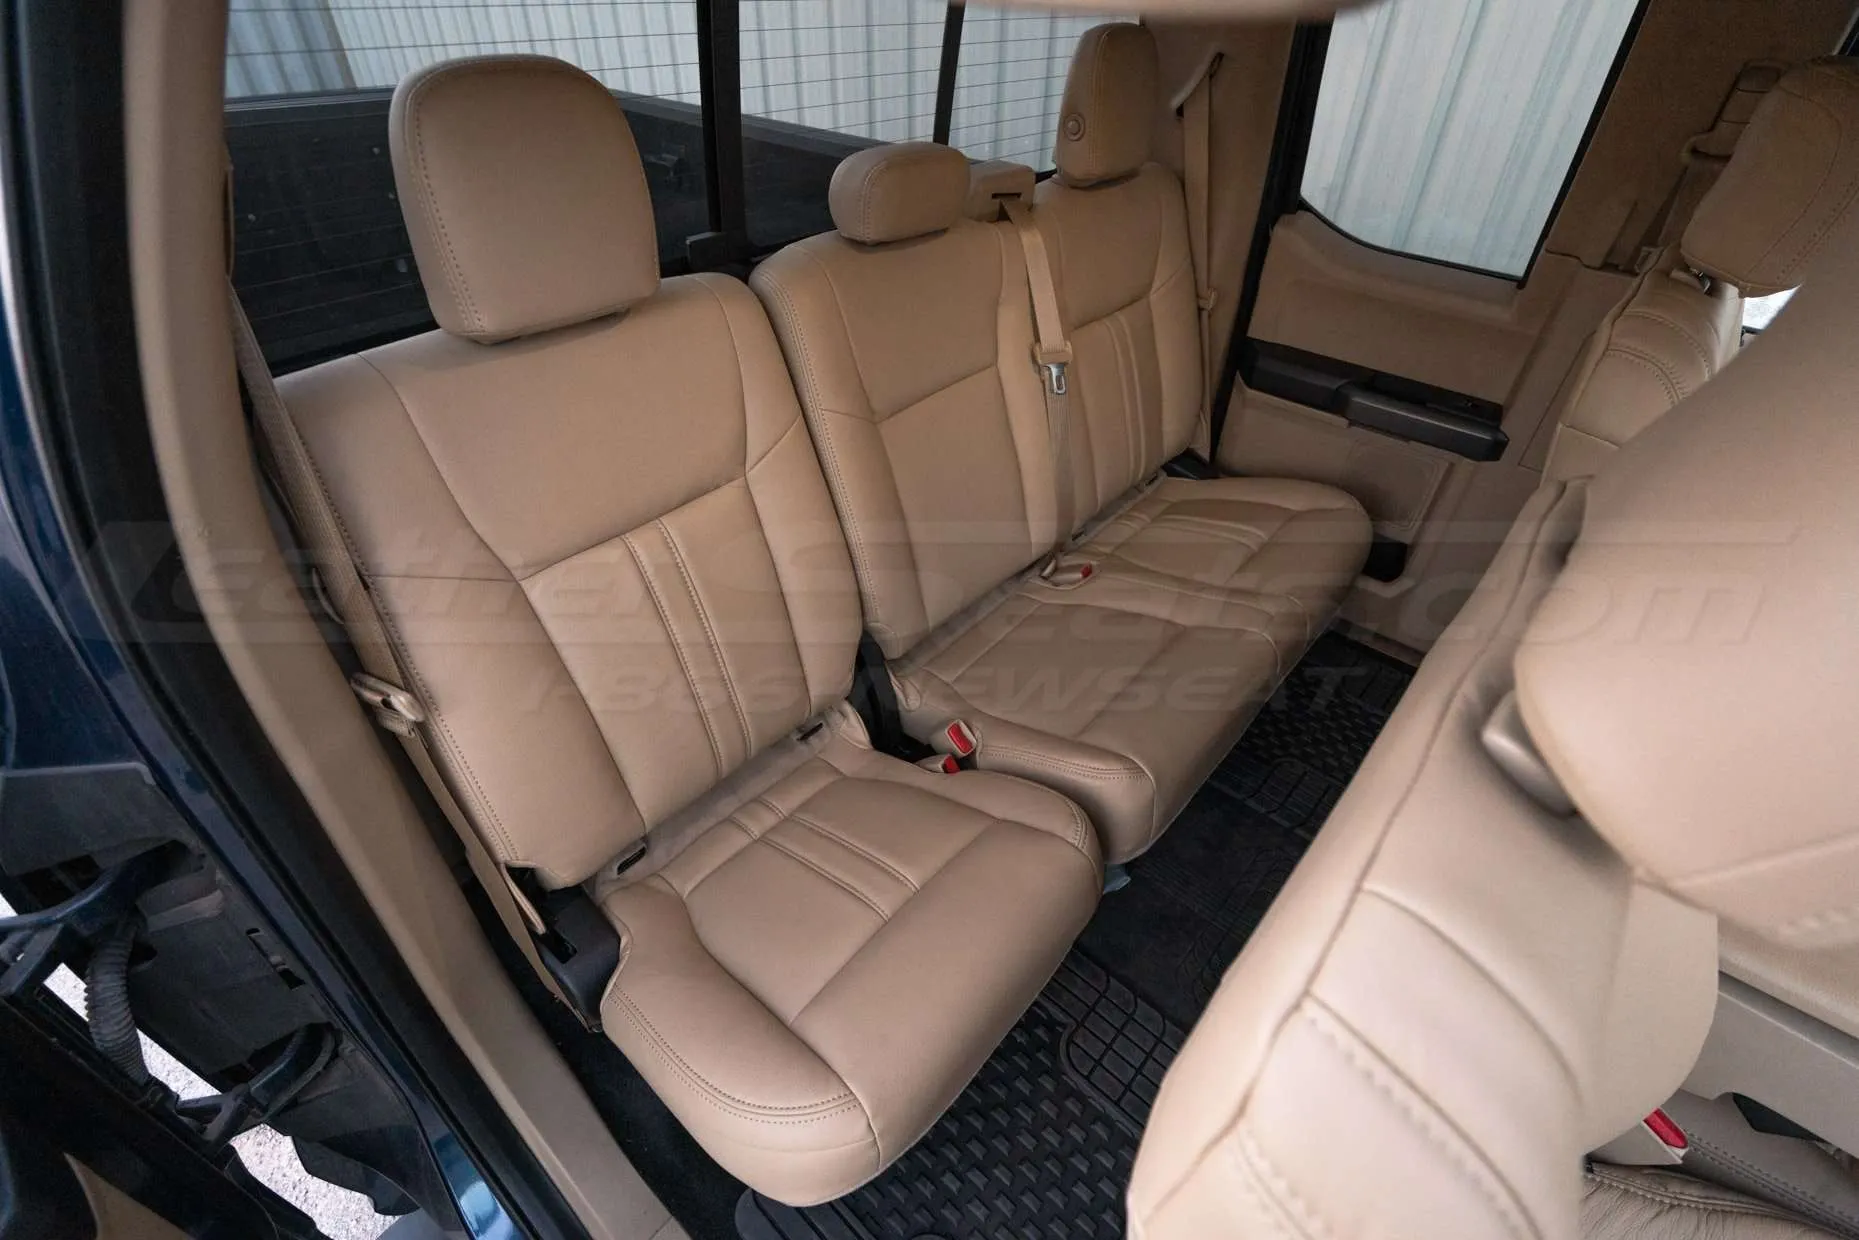 LeatherSeats.com Ford F-150 Bisque leather interior - Rear seats from passenger side